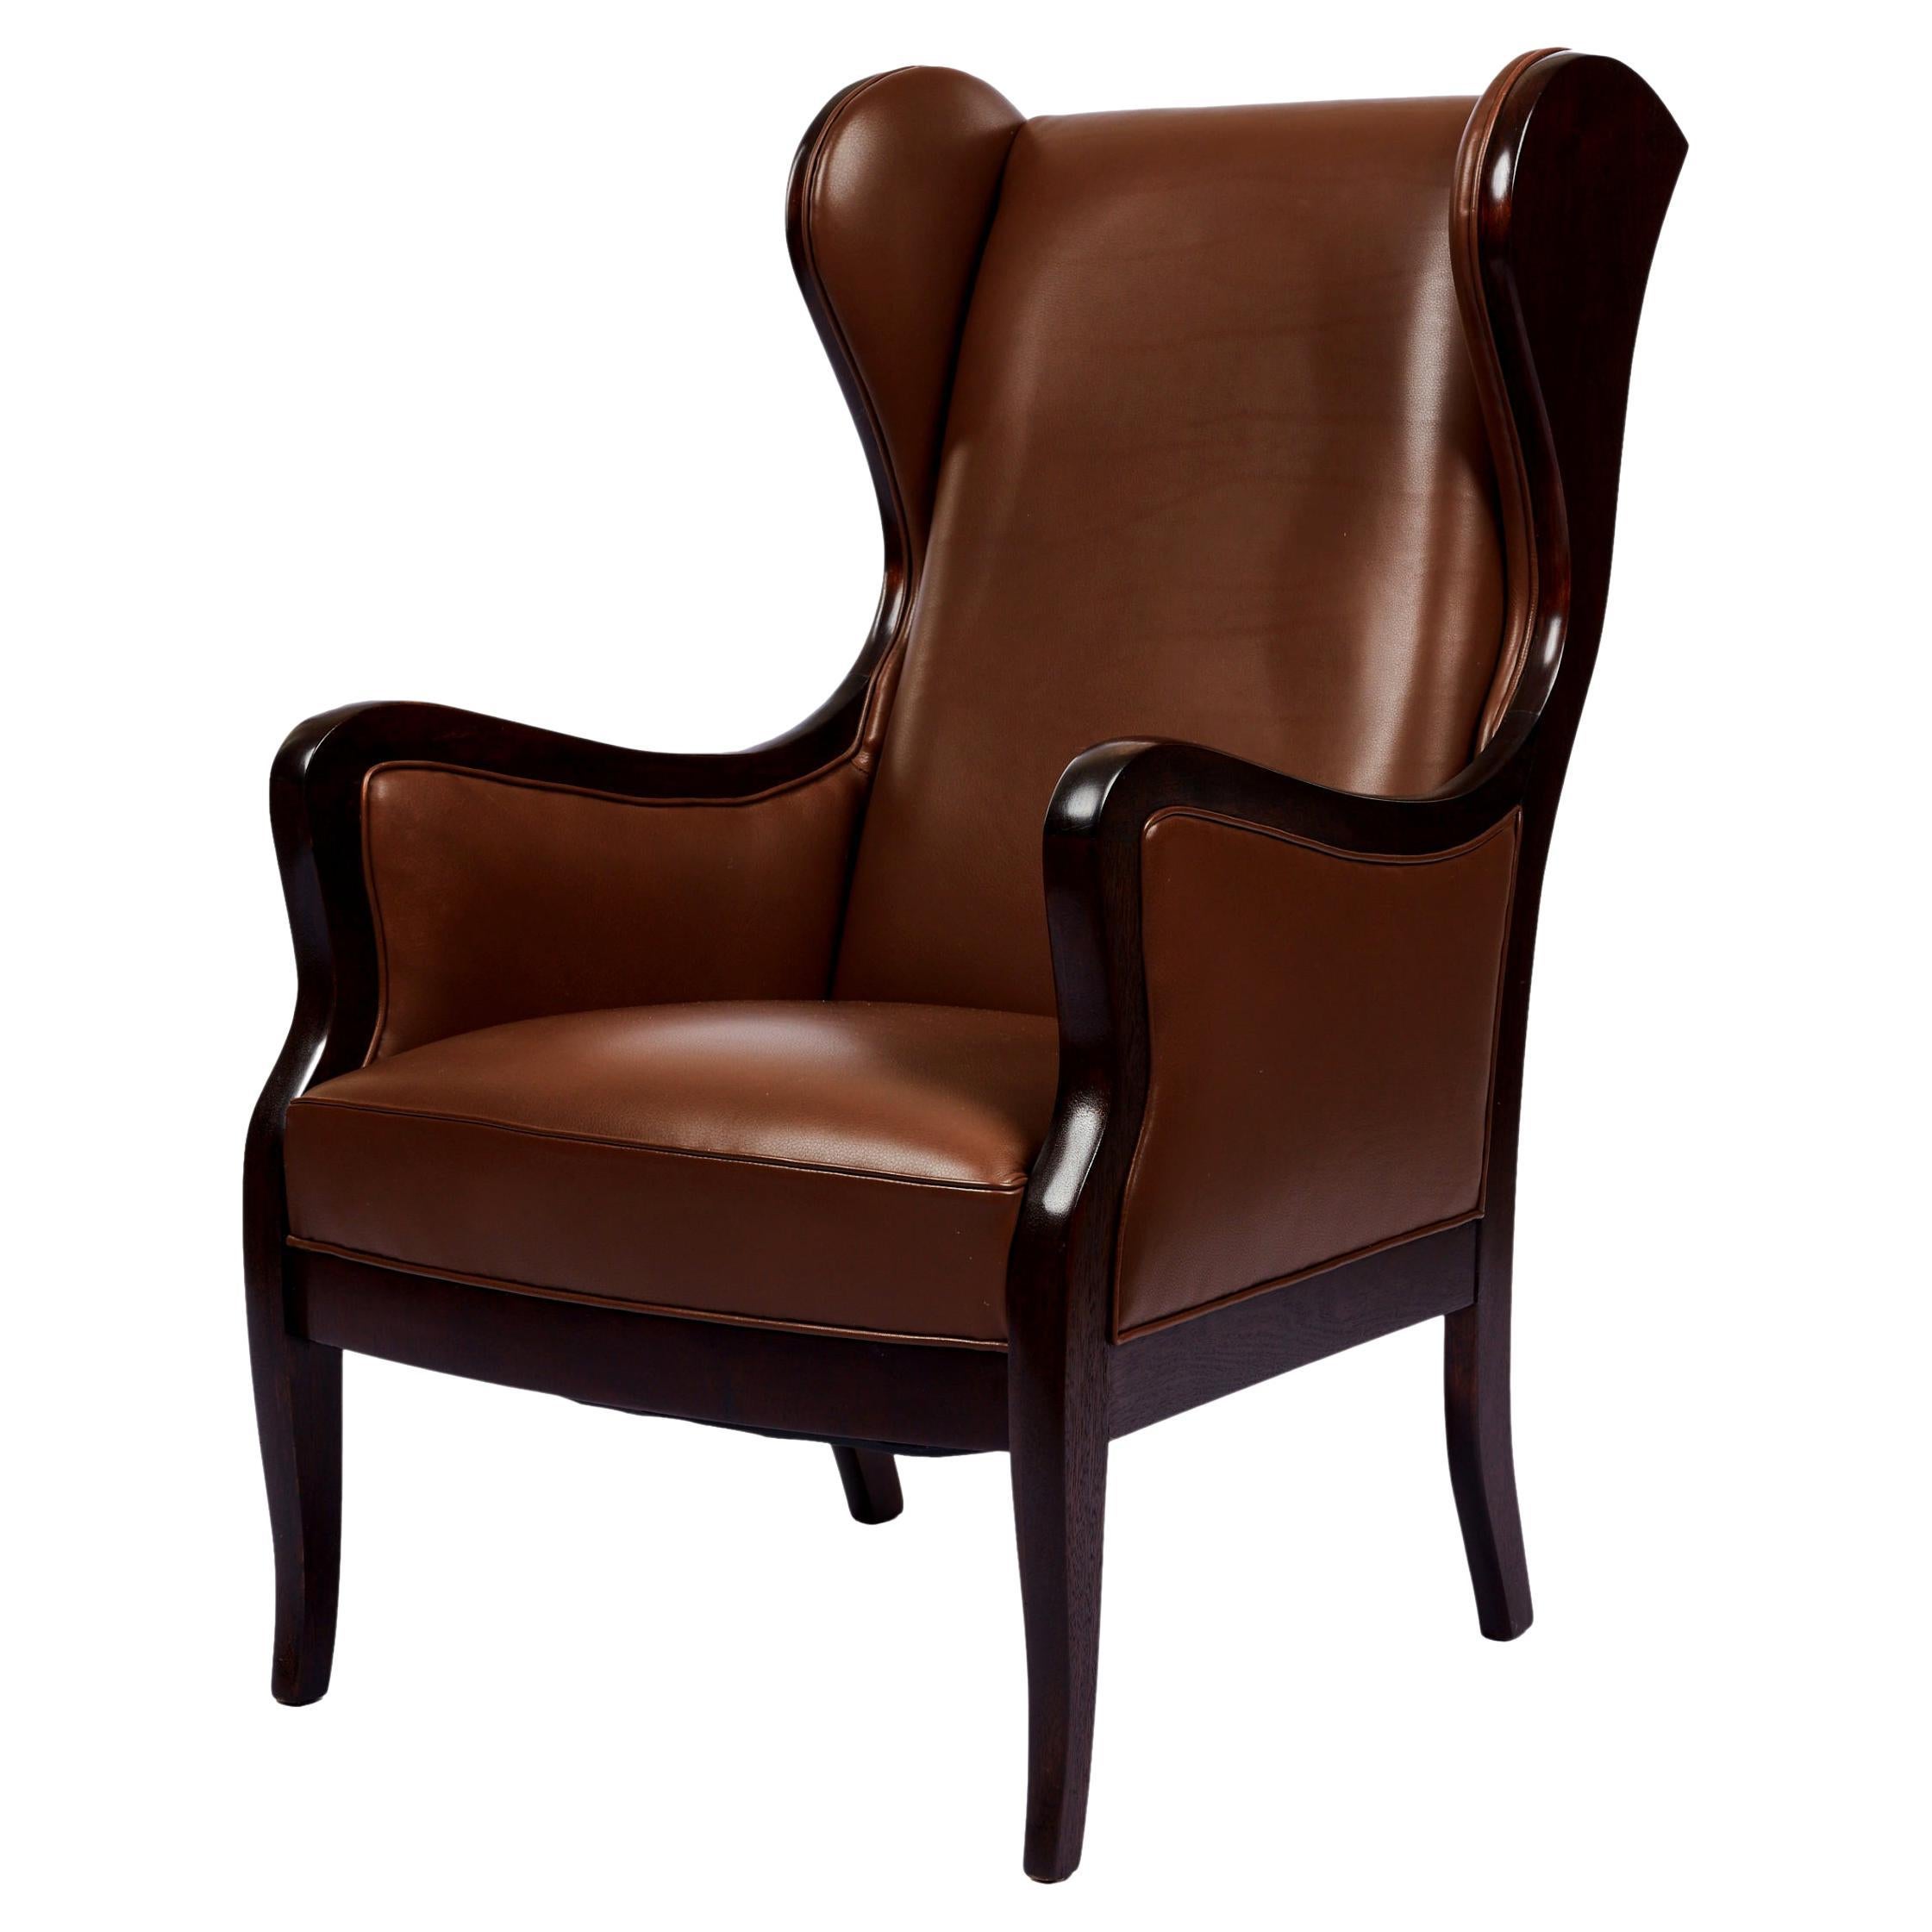 Frits Henningsen Wingback Lounge Chair